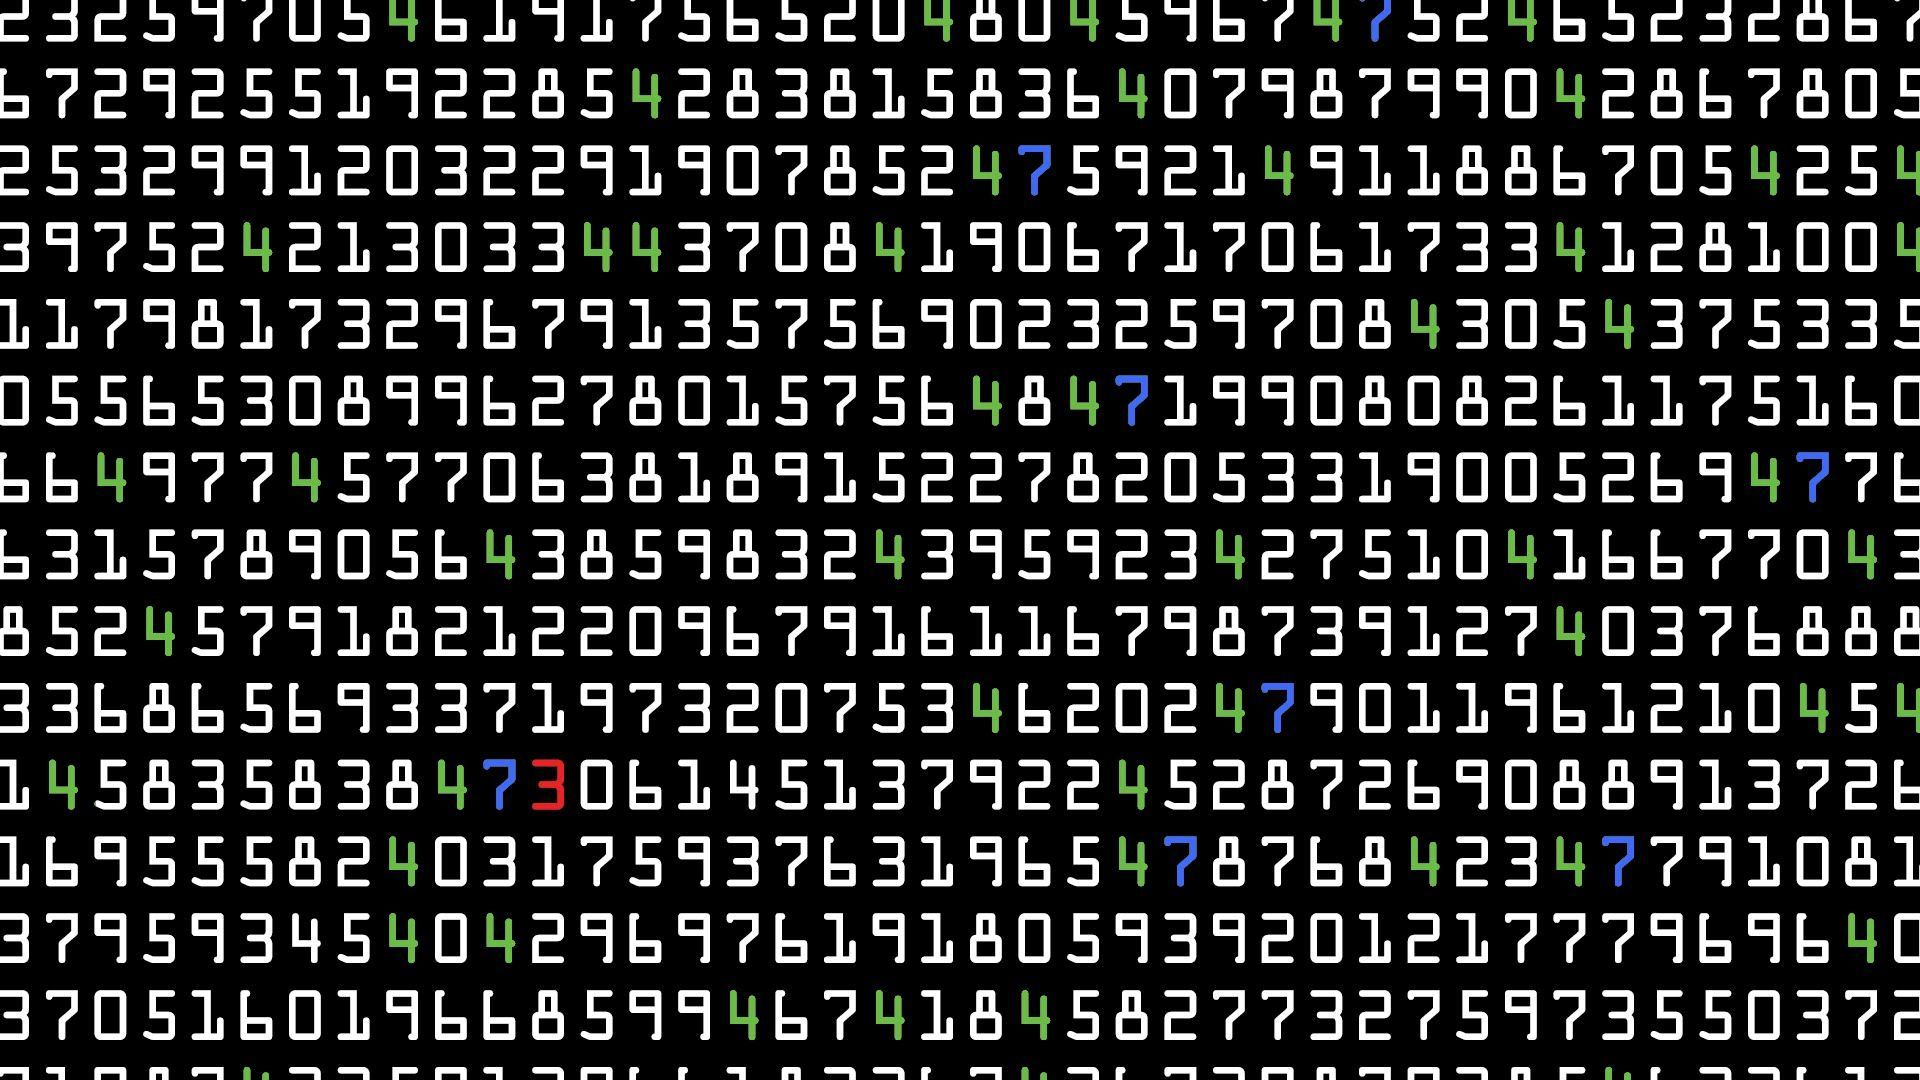 Cryptography Wallpaper Free Cryptography Background